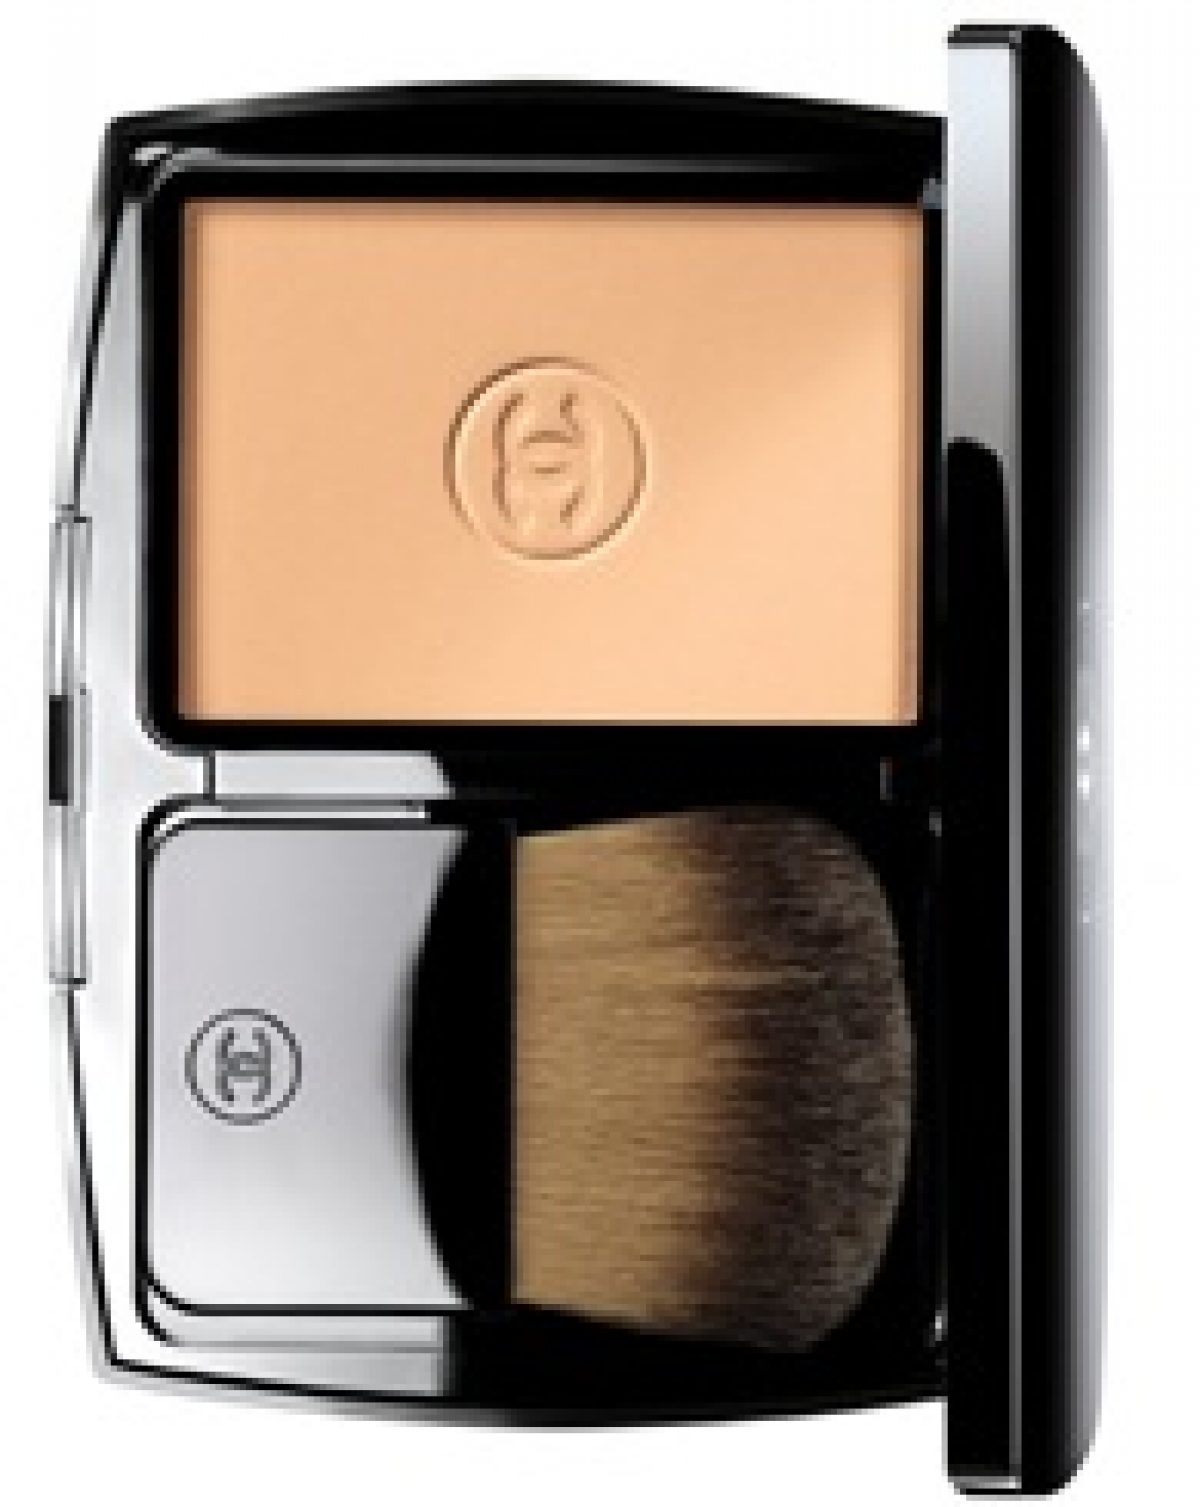 Chanel Vitalumiere Loose Powder Foundation for Fall 2014 - Beauty